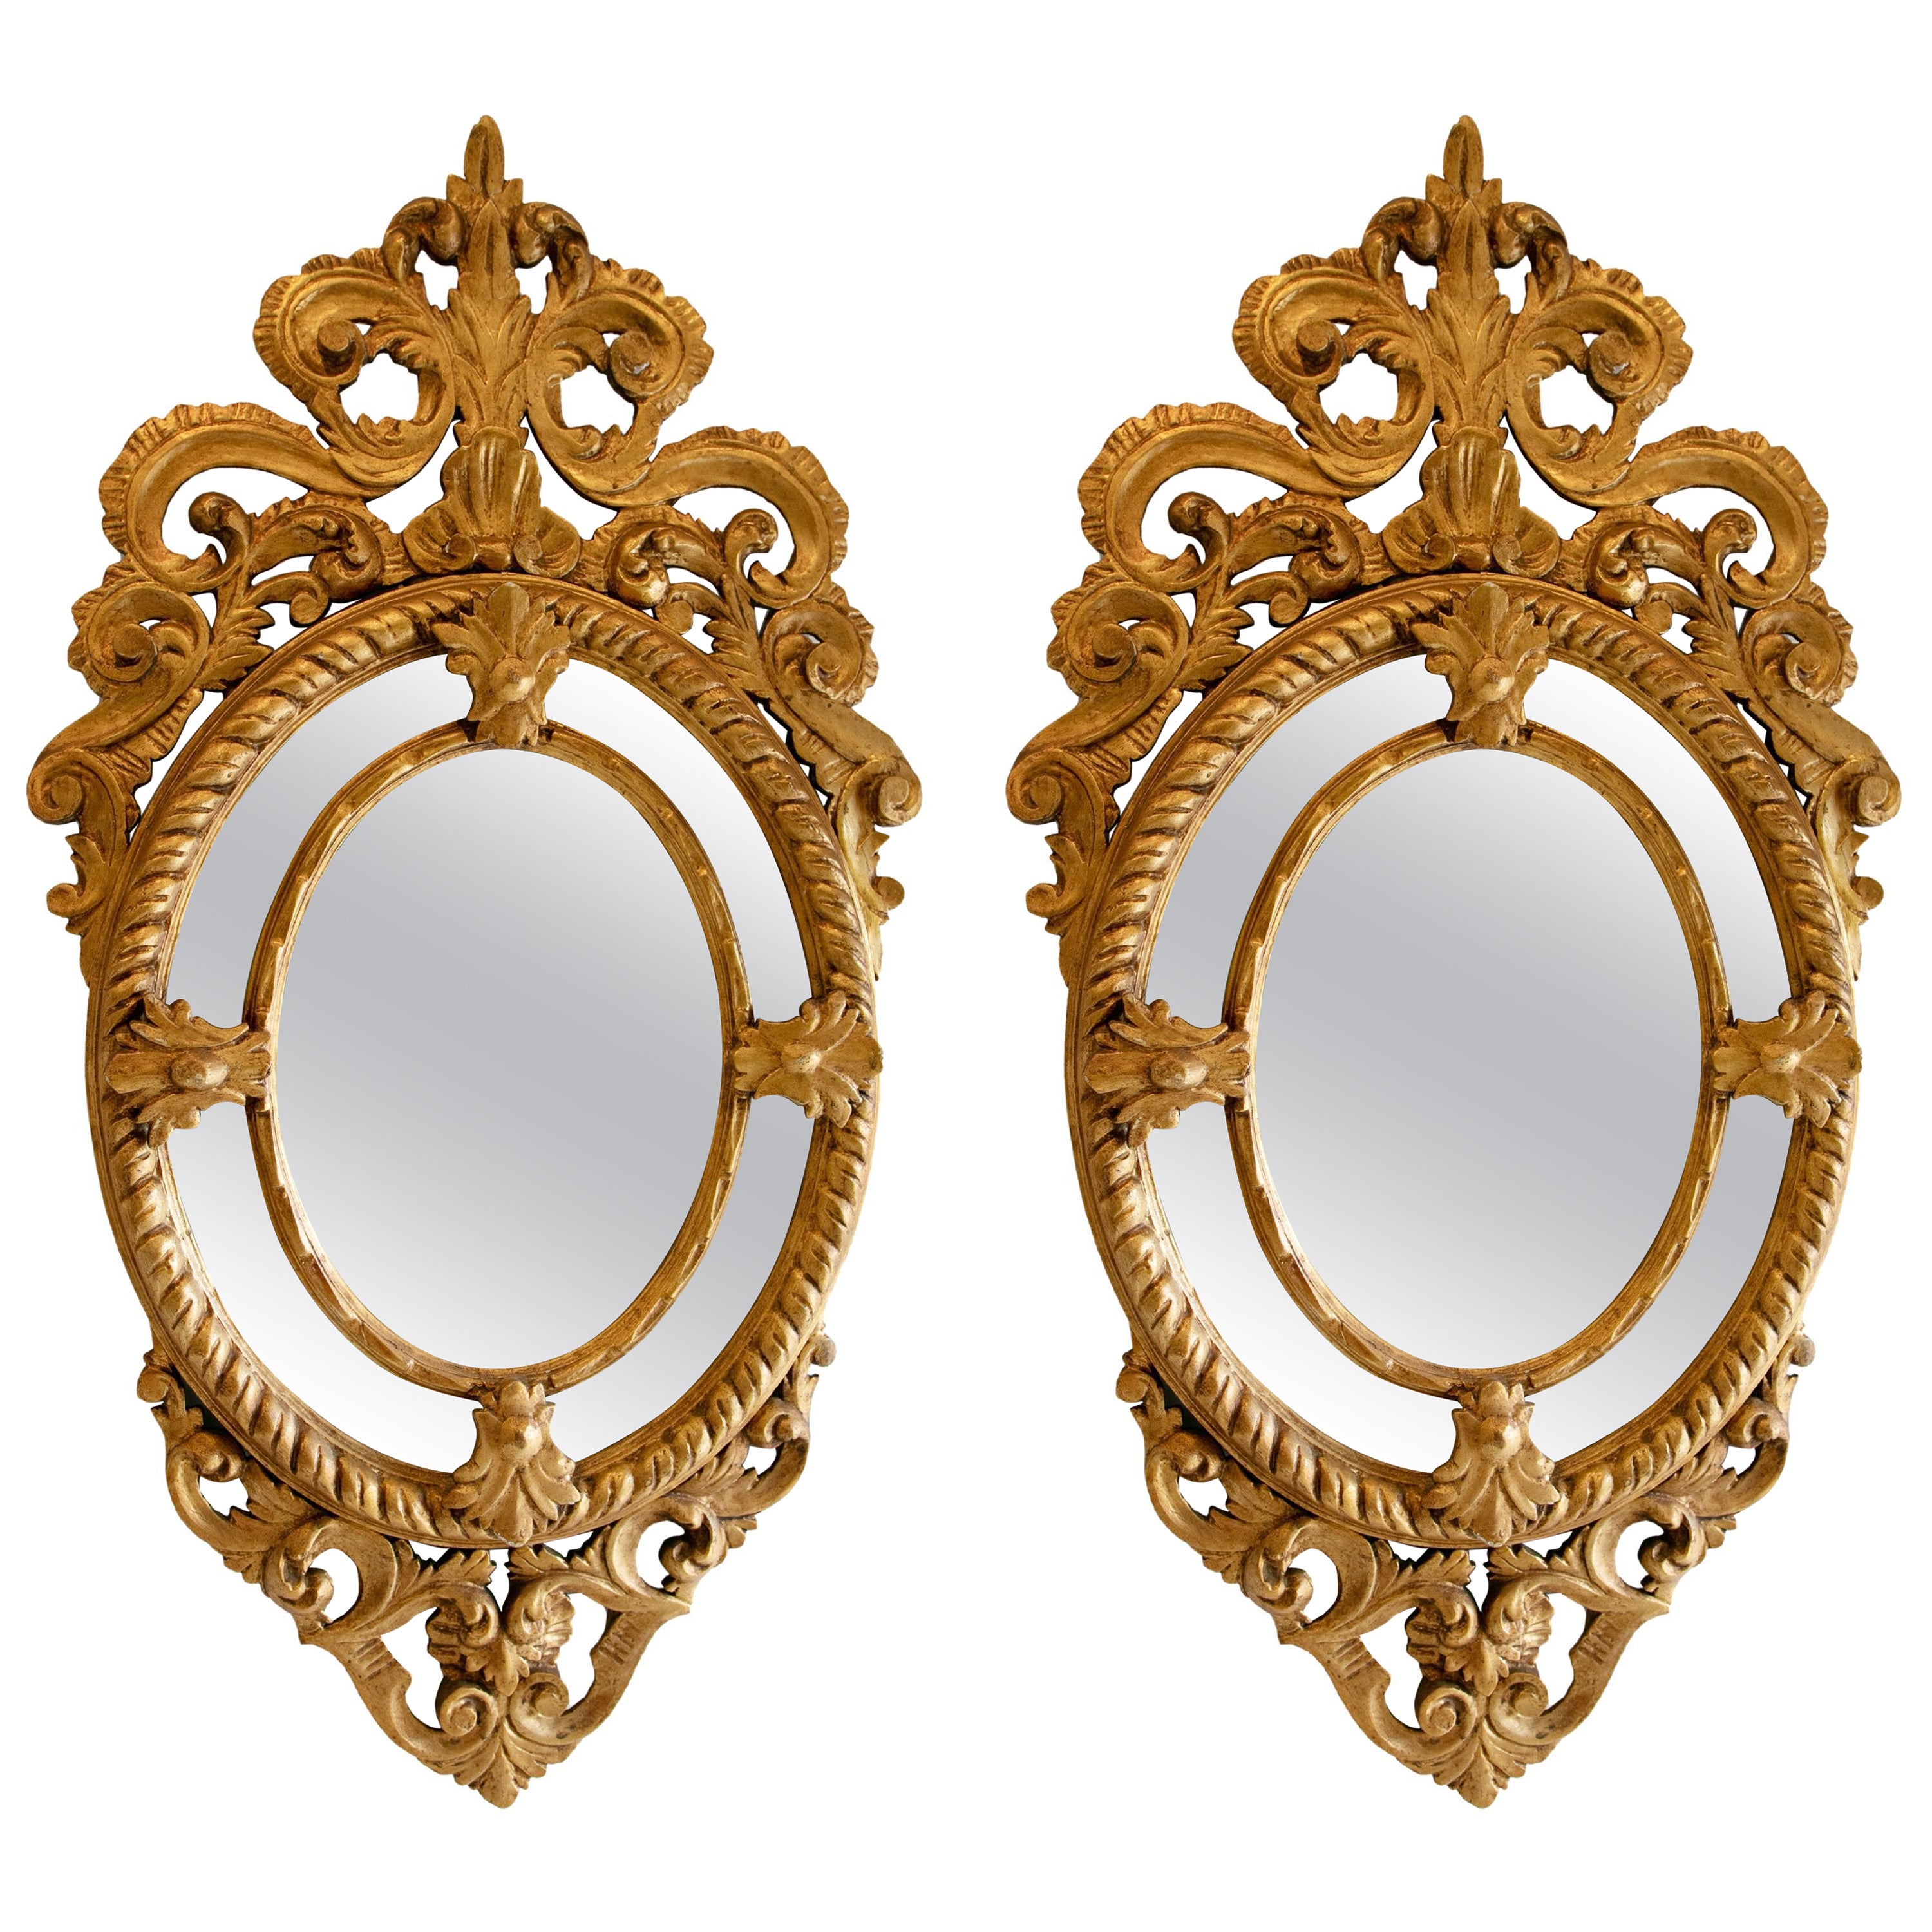 French Pair of Hand-Carved Oval-Shaped Gilded Mirrors